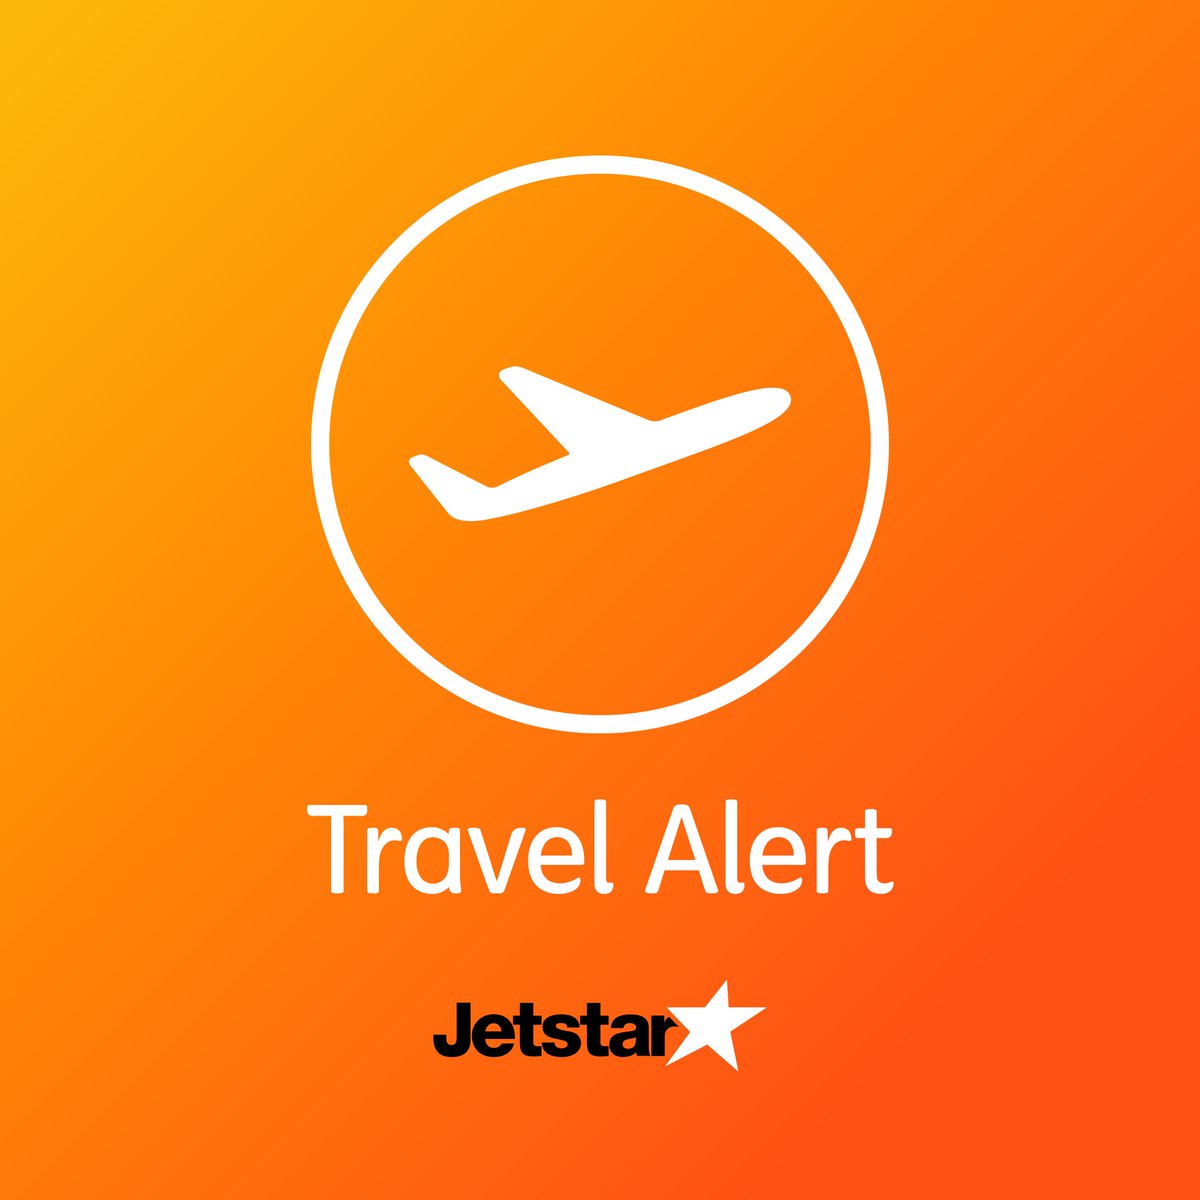 We are monitoring the impact of Cyclone Jasper as it approaches the Far North Queensland Coast. We'll let customers know if their flight is impacted. For more info, see our Travel Alert bitly.ws/35hTQ